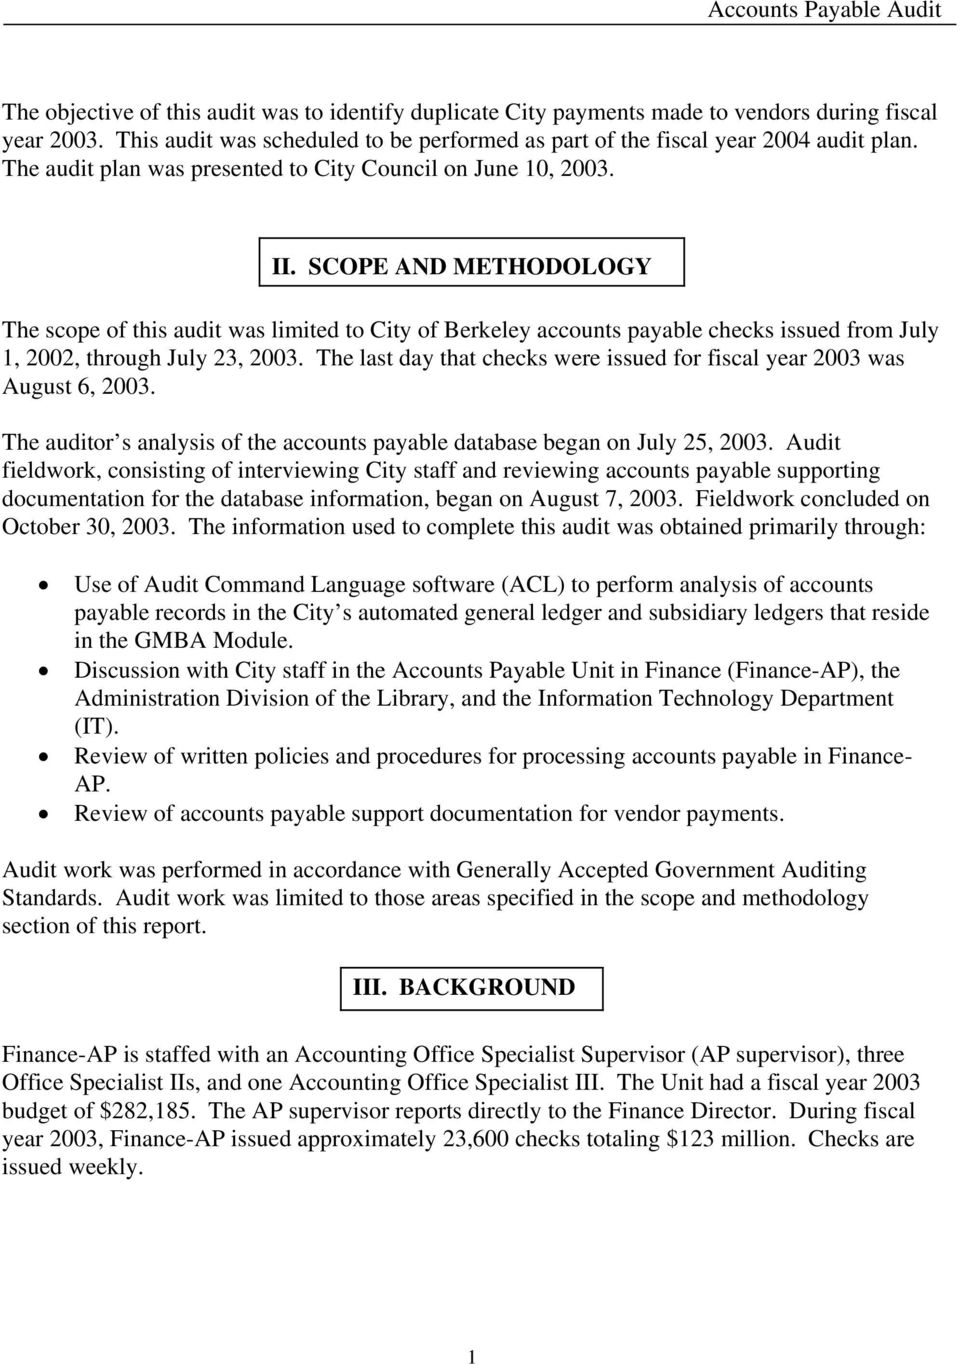 SCOPE AND METHODOLOGY The scope of this audit was limited to City of Berkeley accounts payable checks issued from July 1, 2002, through July 23, 2003.